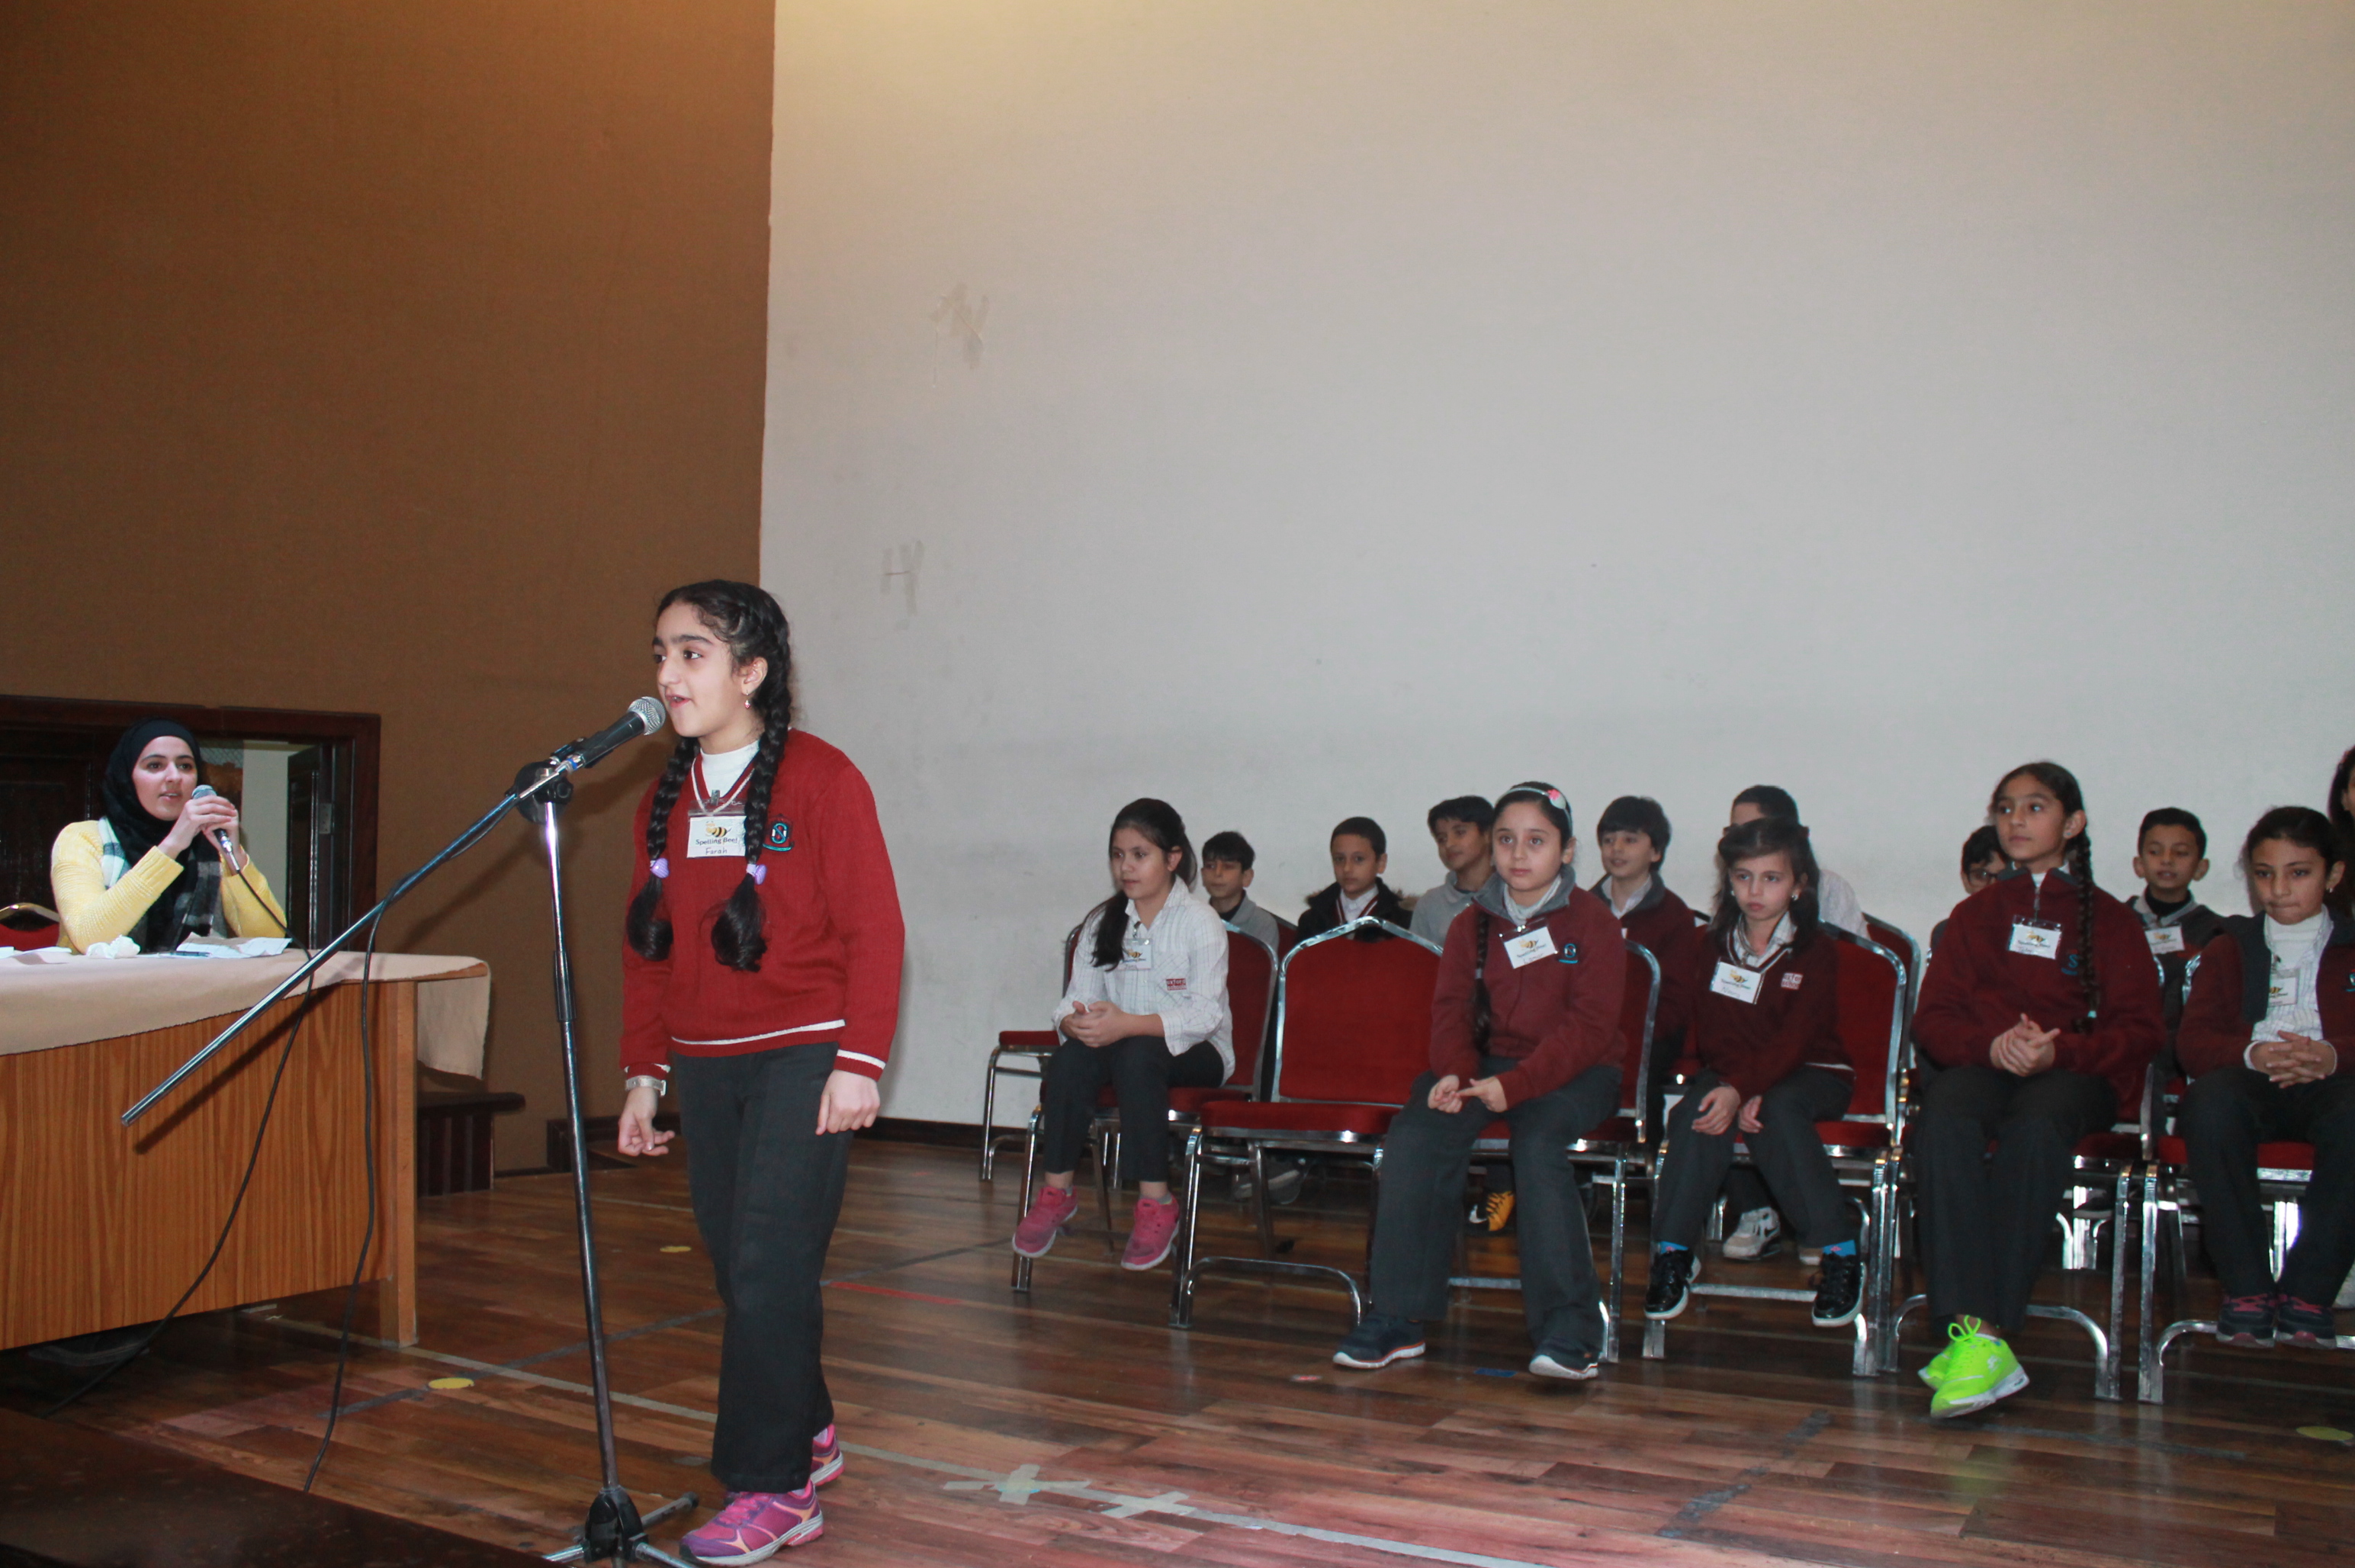 Spelling Bee Competition